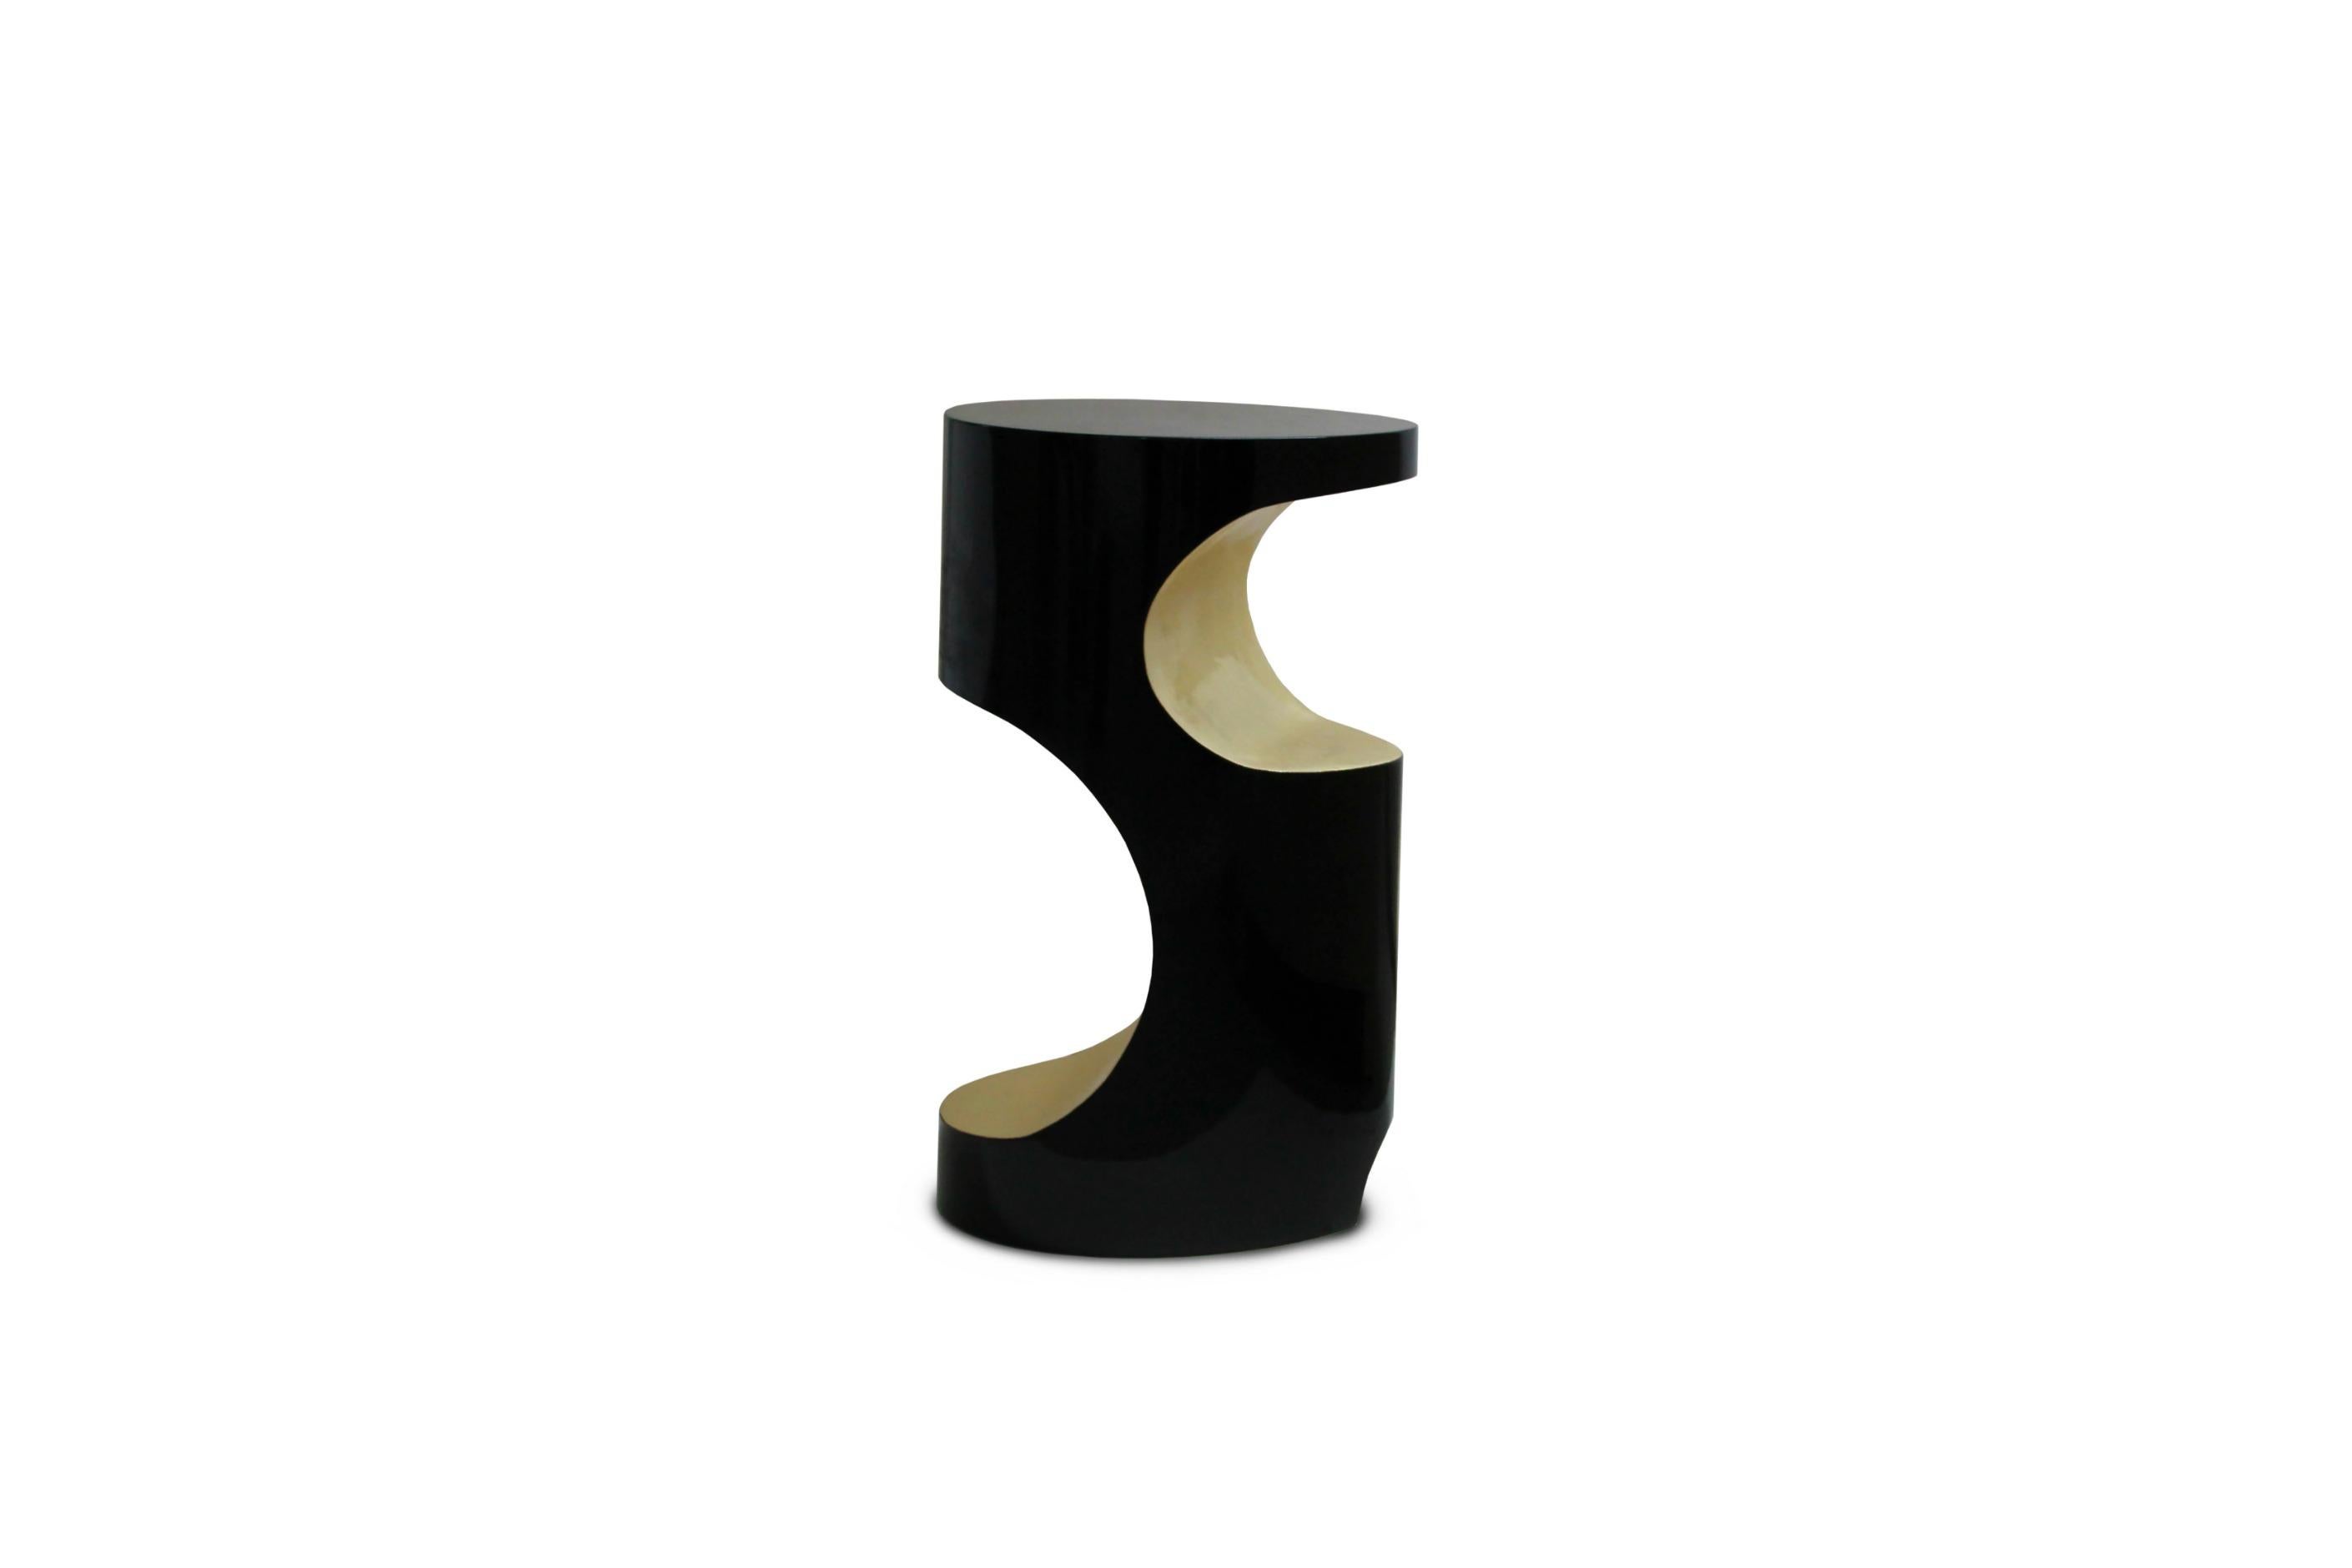 Bryce is a giant natural amphitheater caused by the erosion through the Paunsaugnt Plateau. BRYCE Side Table pays tribute to it through its unique design, fiberglass body & finishes in high gloss black lacquer with gold leaf. This small end table